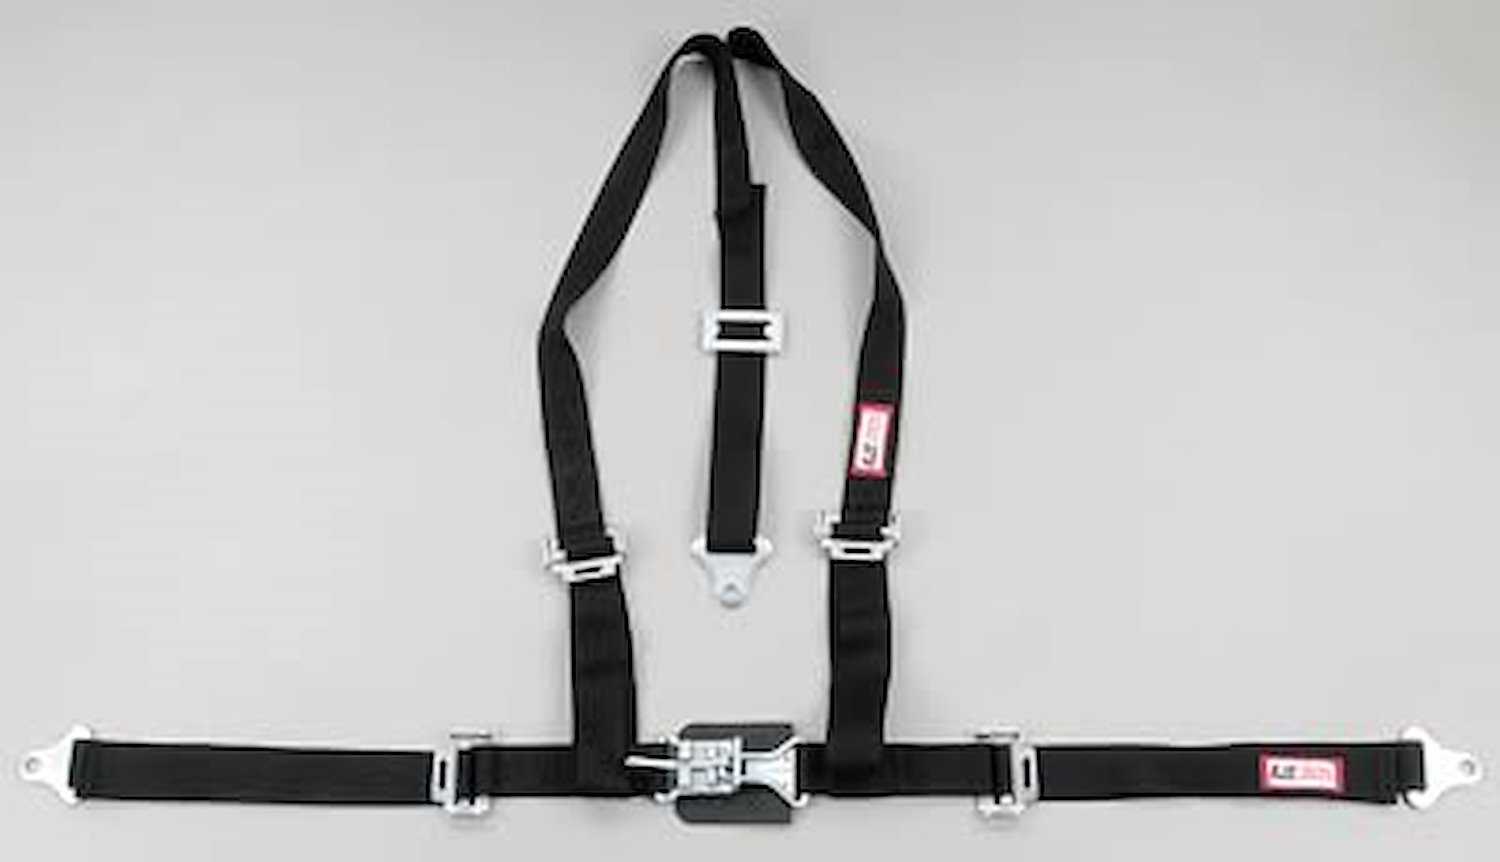 NON-SFI L&L HARNESS 3 PULL UP Lap Belt SEWN IN 2 Shoulder Harness V ROLL BAR Mount ALL BOLT ENDS RED